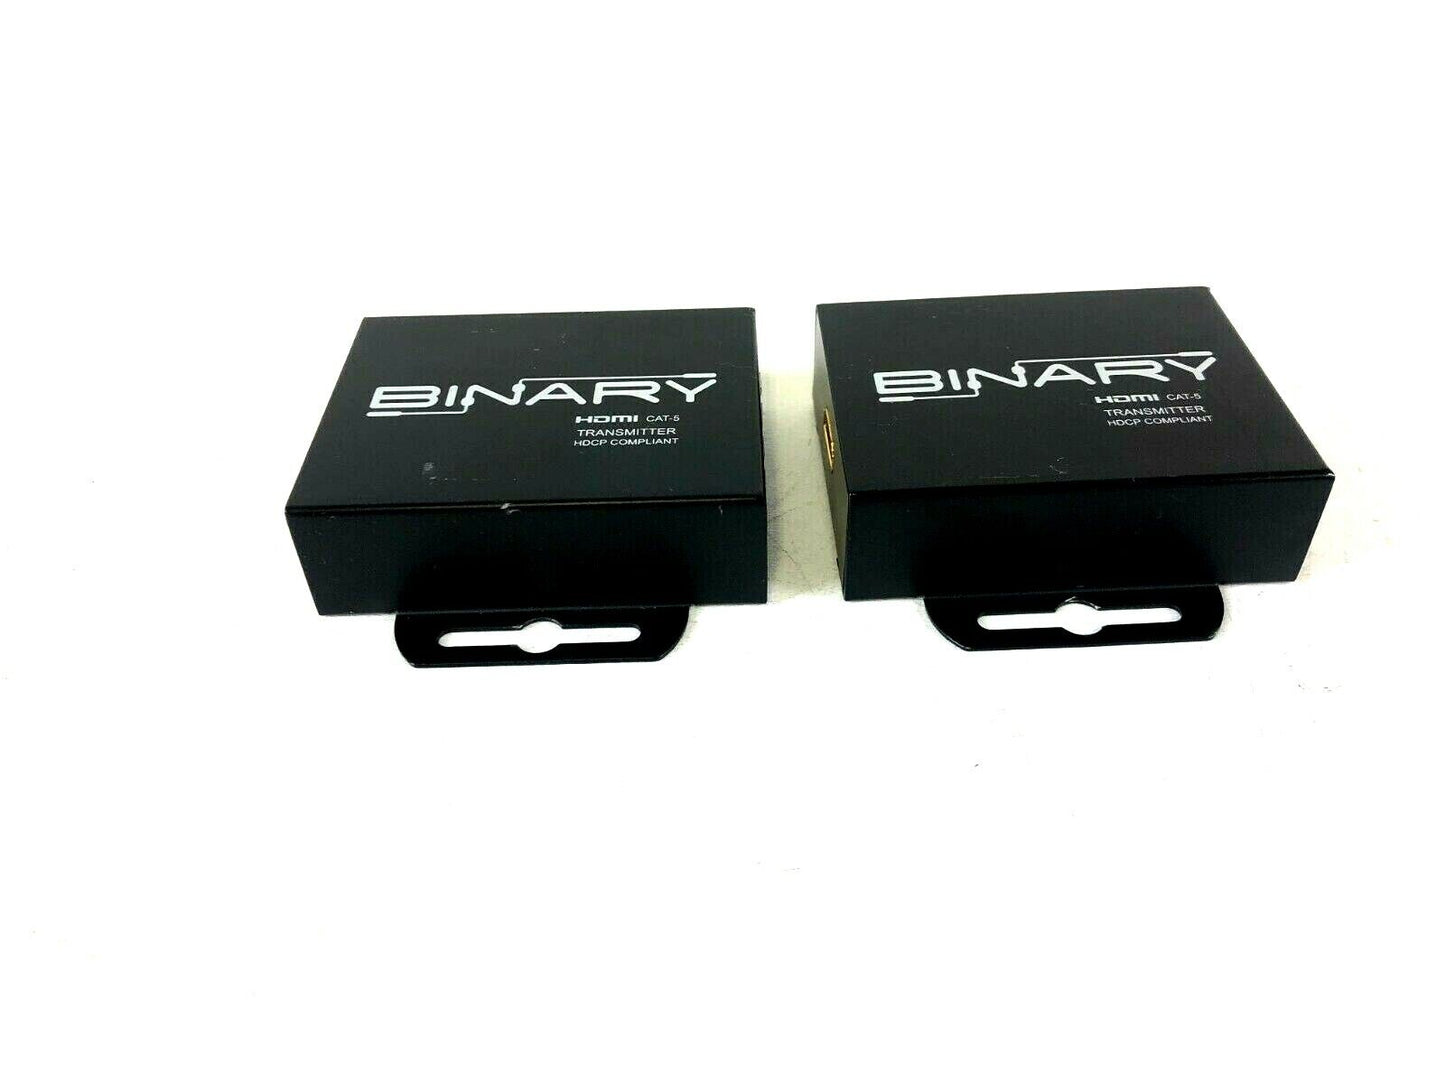 Lot of 2 Binary HDMI CAT-5 Transmitter HDCP Compliant